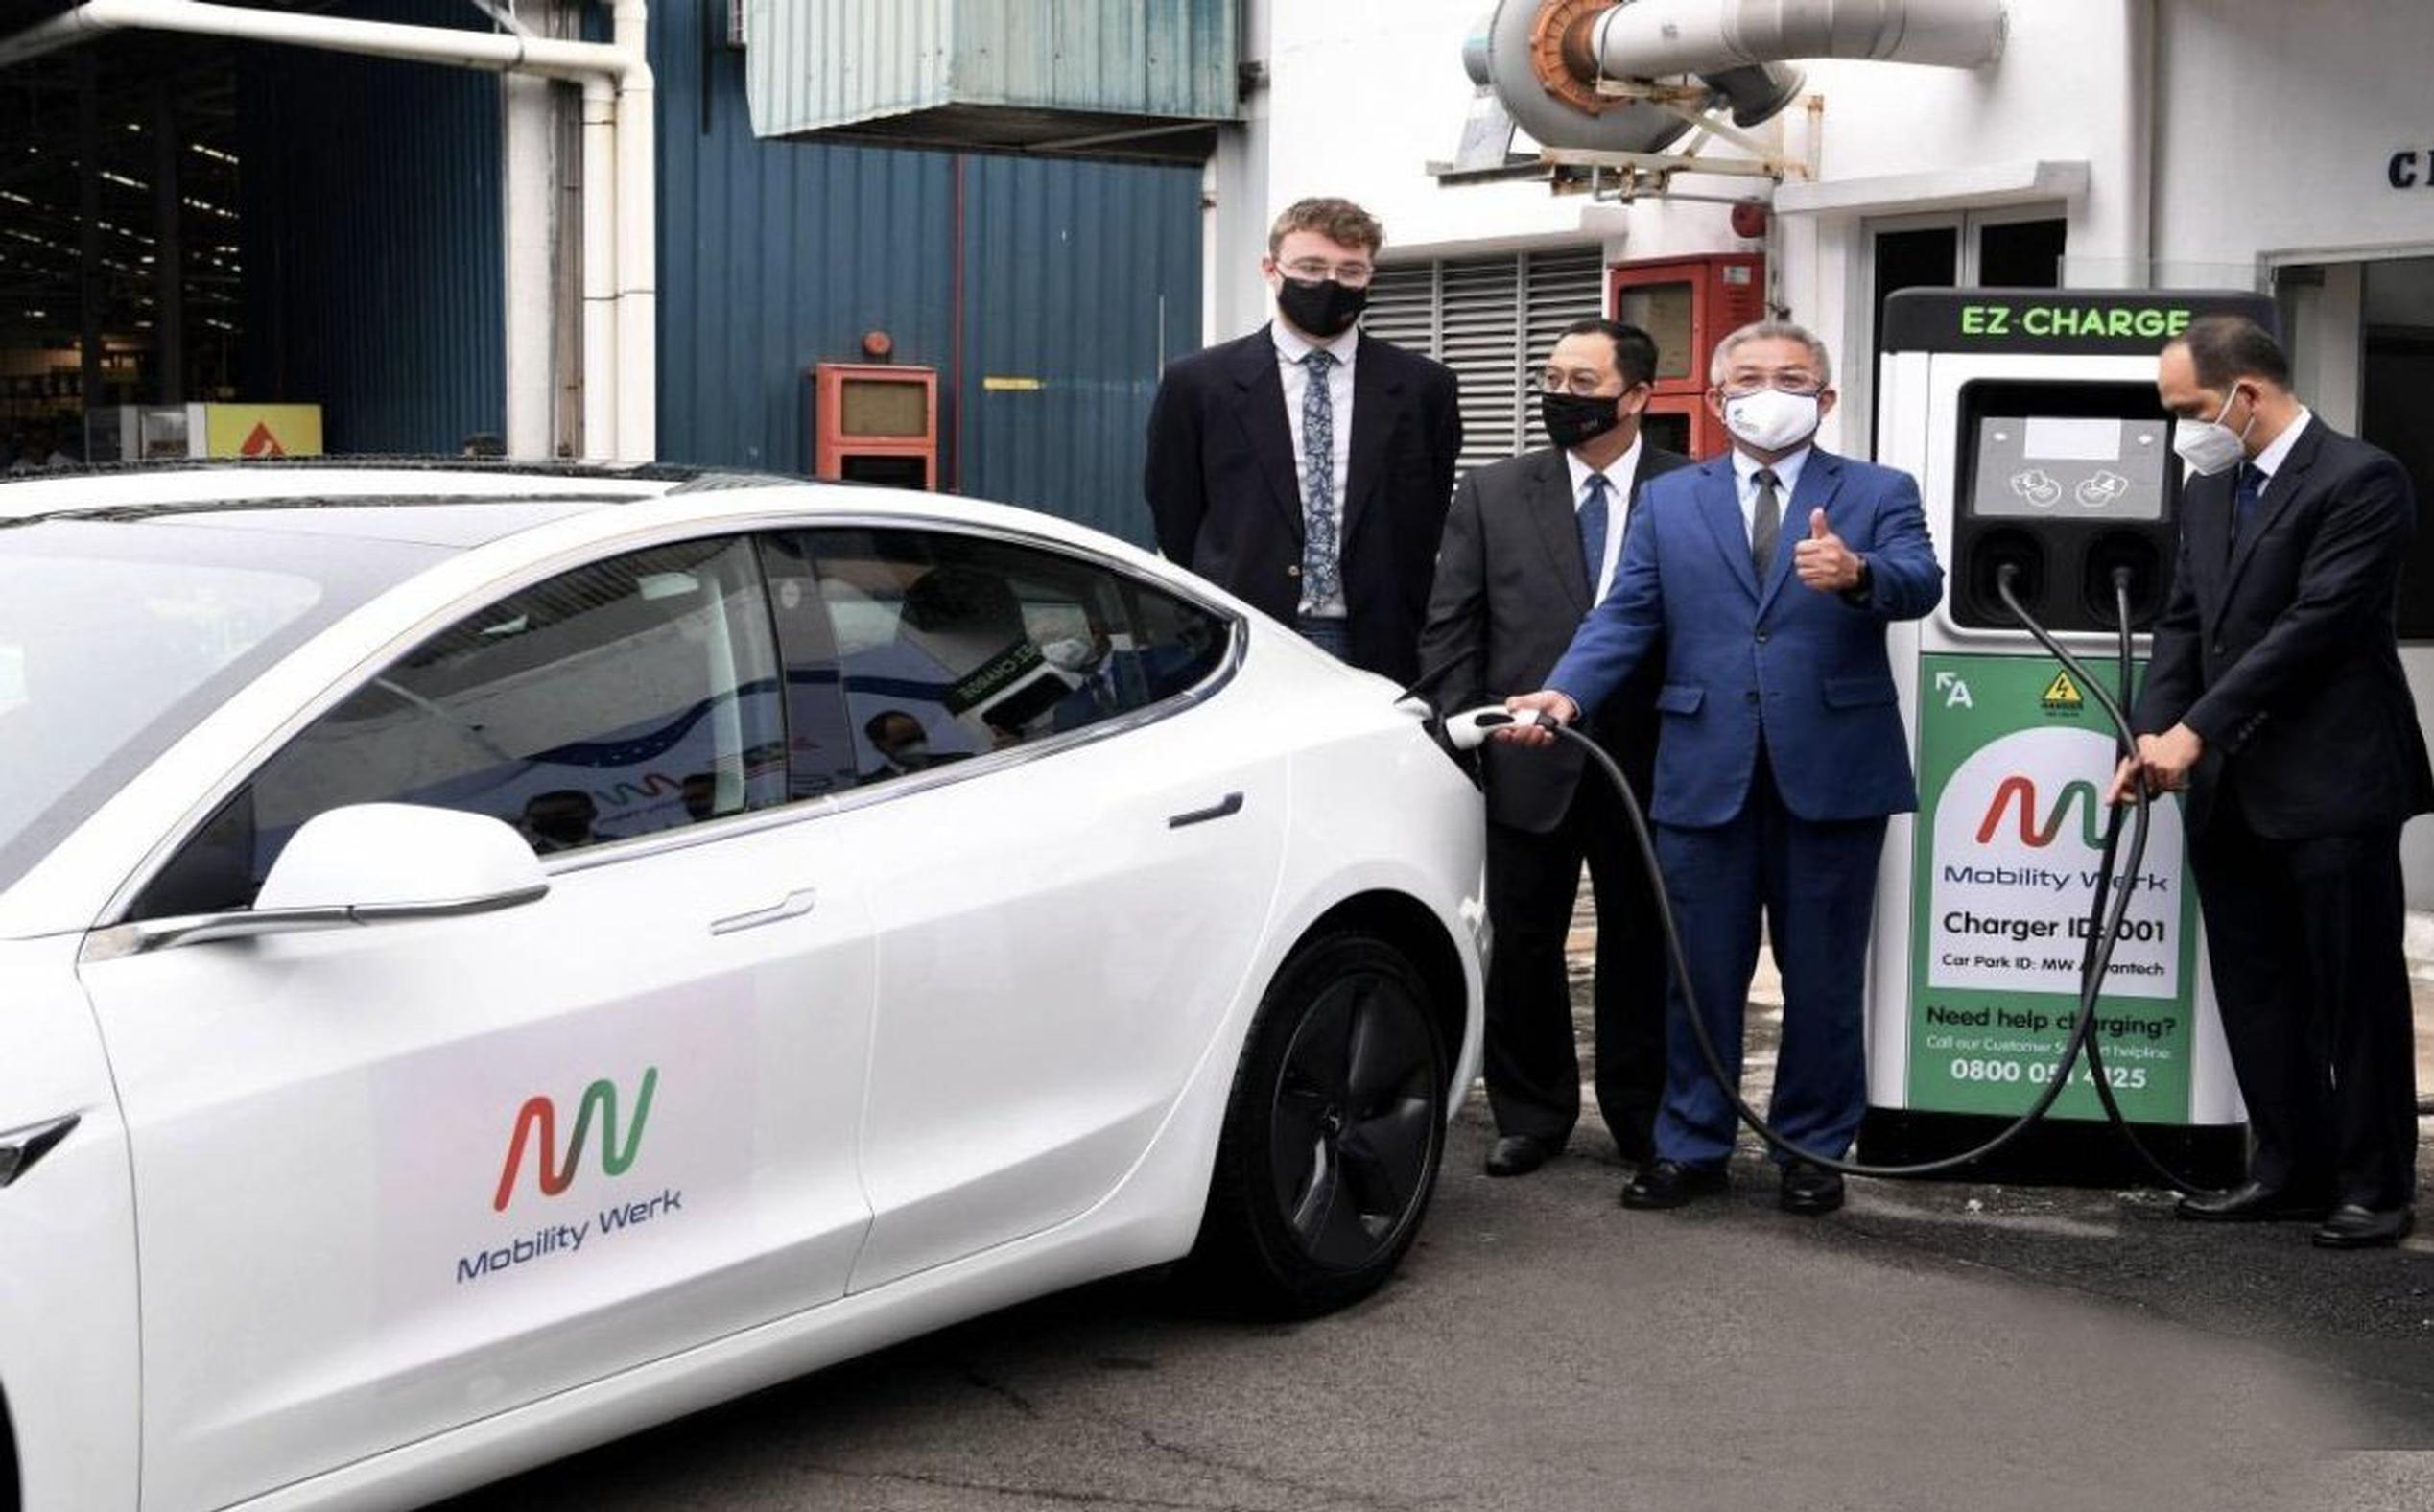 EZ-Charge operations director Peter Shadbolt looks on while Malaysian government science, technology and innovation minister Datuk Seri Dr Adham Baba plugs a car into one of the brand’s charging units to celebrate the signing of a memorandum of understanding that will see the Bicester company’s tech underpin Malaysia’s EV infrastructure